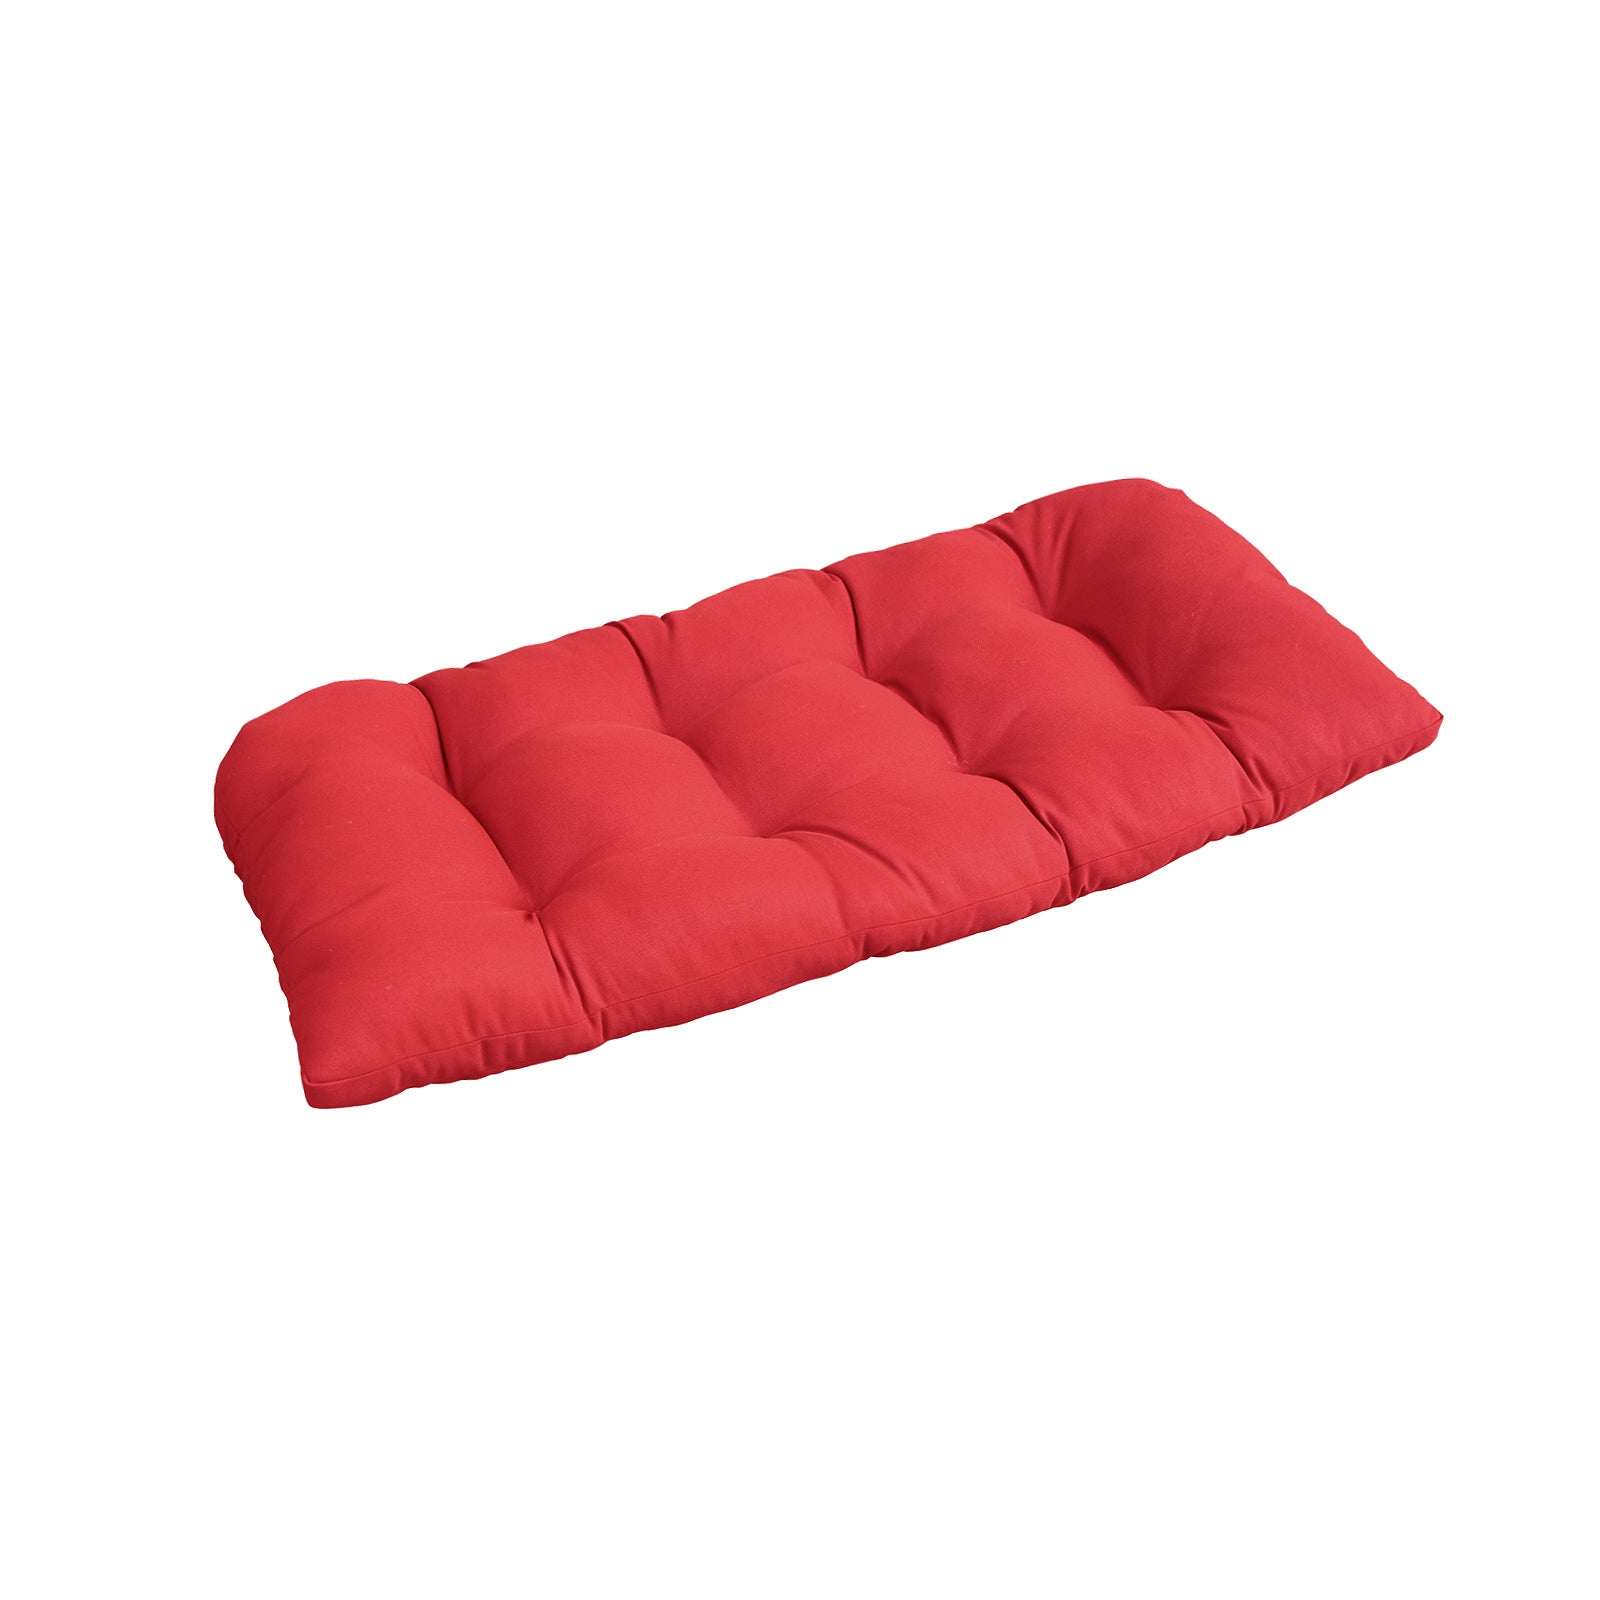 Indoor Outdoor Swing Bench Loveseat Cushion Tufted Patio Seating Cushions Bright Red